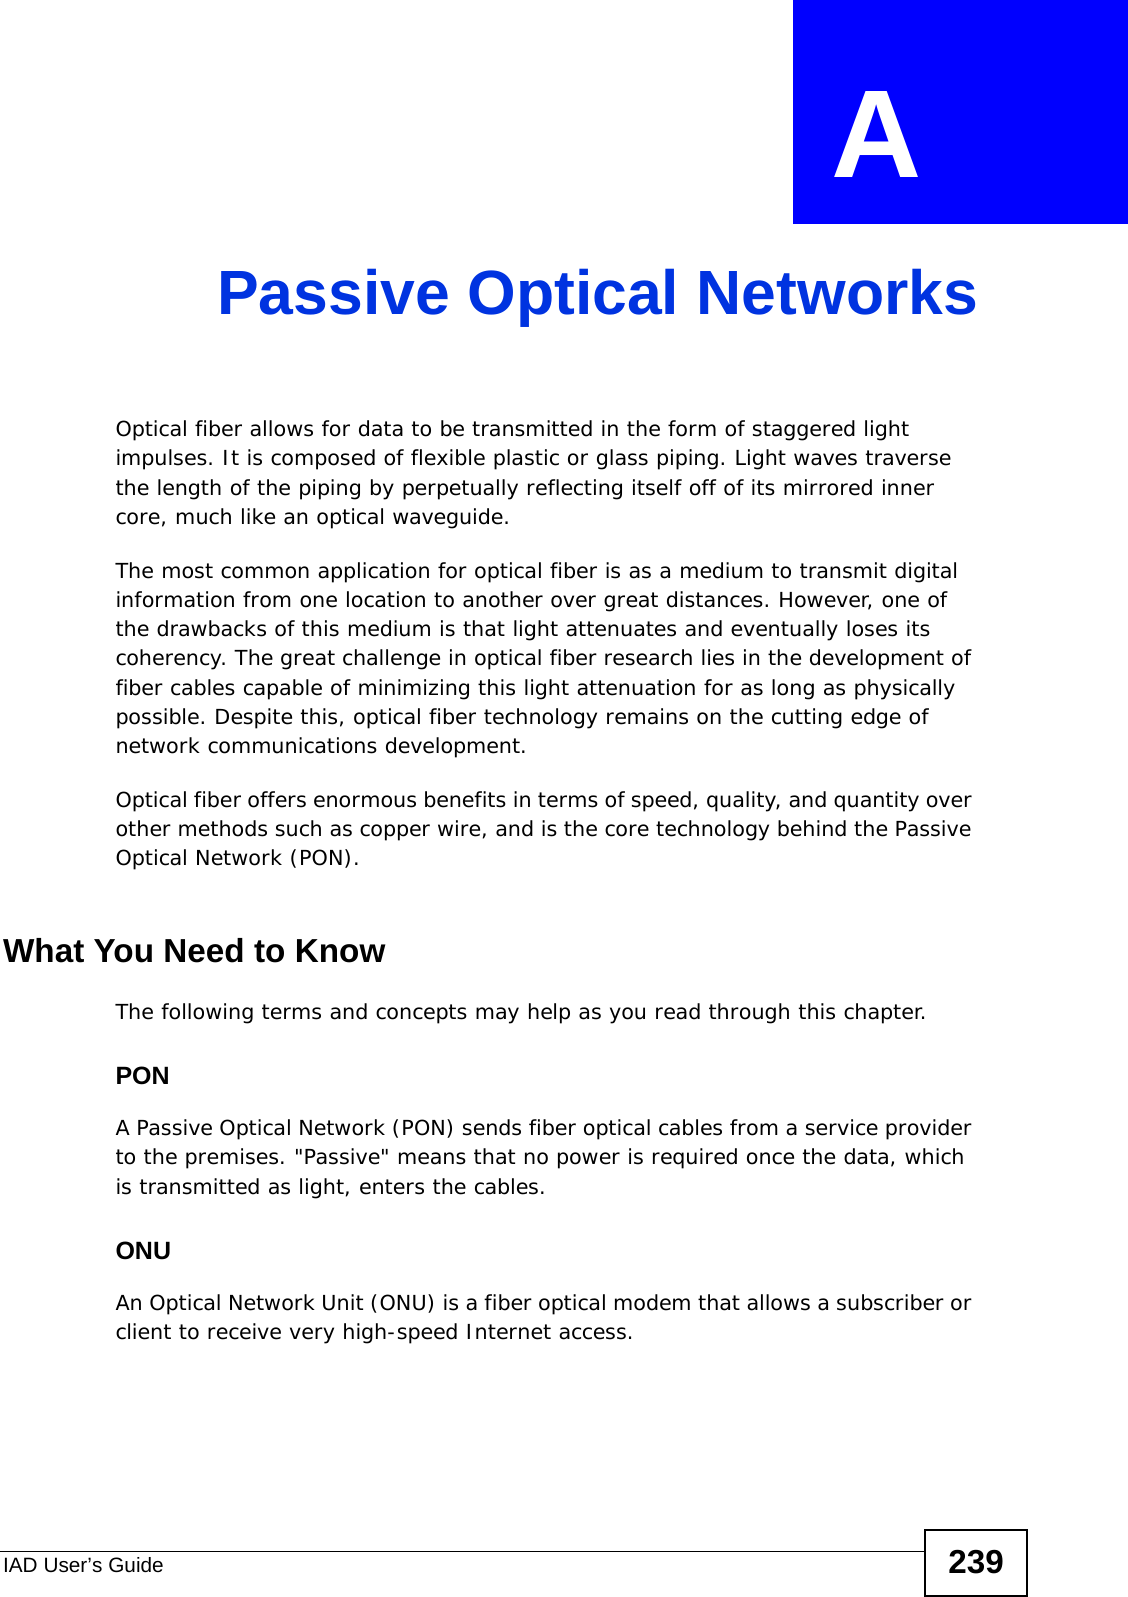 IAD User’s Guide 239APPENDIX  A Passive Optical NetworksOptical fiber allows for data to be transmitted in the form of staggered light impulses. It is composed of flexible plastic or glass piping. Light waves traverse the length of the piping by perpetually reflecting itself off of its mirrored inner core, much like an optical waveguide.The most common application for optical fiber is as a medium to transmit digital information from one location to another over great distances. However, one of the drawbacks of this medium is that light attenuates and eventually loses its coherency. The great challenge in optical fiber research lies in the development of fiber cables capable of minimizing this light attenuation for as long as physically possible. Despite this, optical fiber technology remains on the cutting edge of network communications development.Optical fiber offers enormous benefits in terms of speed, quality, and quantity over other methods such as copper wire, and is the core technology behind the Passive Optical Network (PON).What You Need to KnowThe following terms and concepts may help as you read through this chapter.PONA Passive Optical Network (PON) sends fiber optical cables from a service provider to the premises. &quot;Passive&quot; means that no power is required once the data, which is transmitted as light, enters the cables.ONUAn Optical Network Unit (ONU) is a fiber optical modem that allows a subscriber or client to receive very high-speed Internet access.